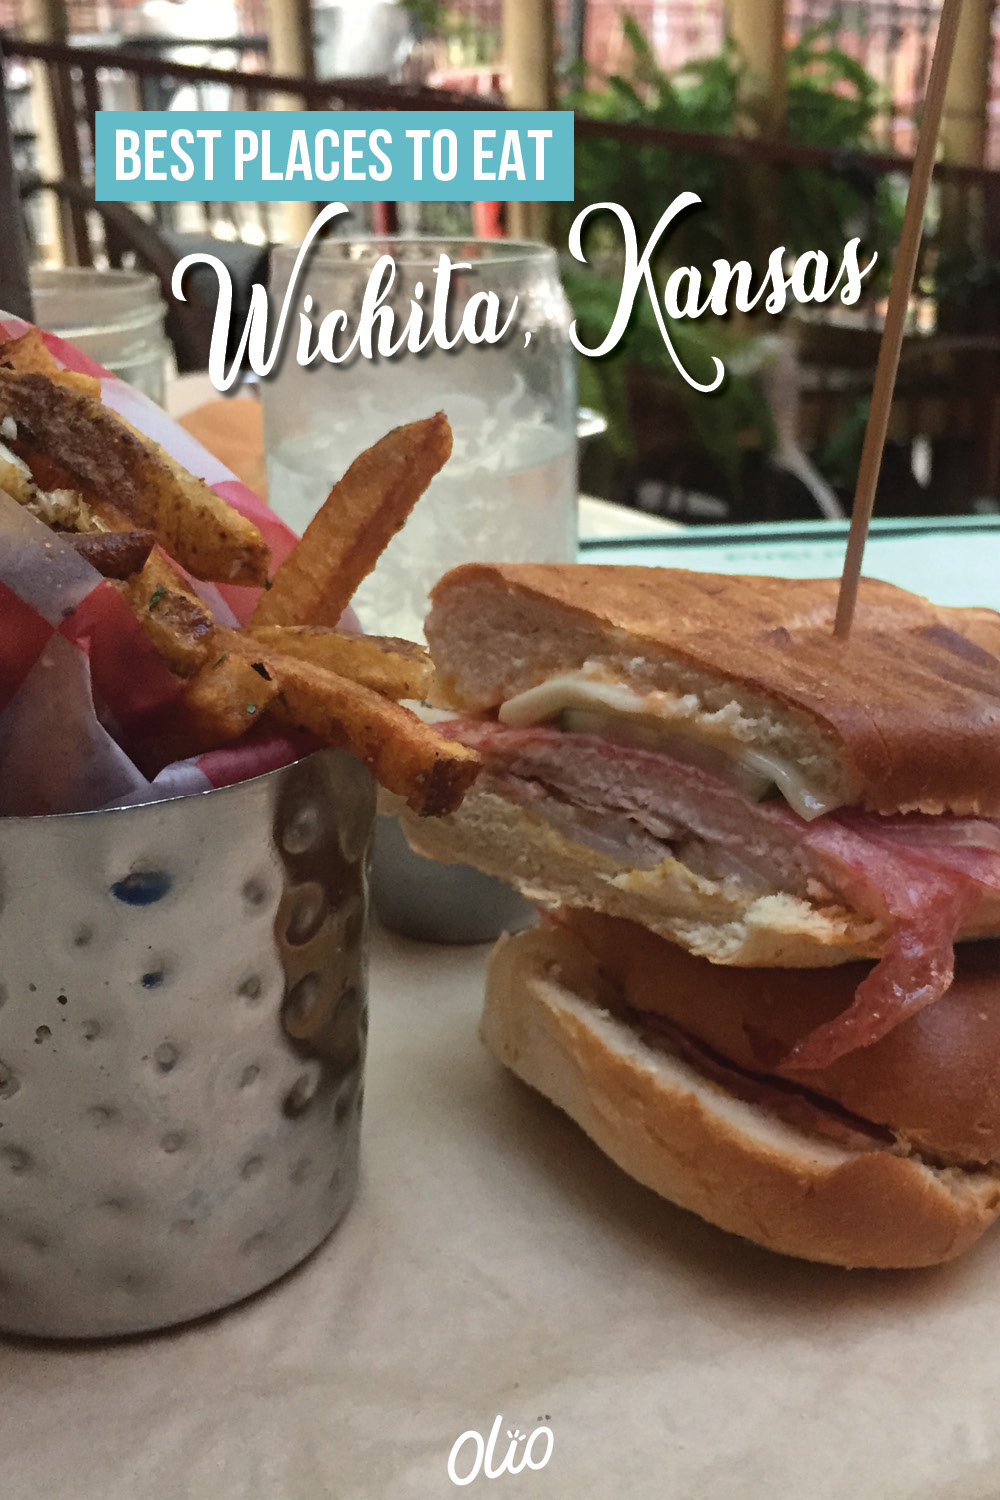 There are so many terrific places to eat in Wichita, Kansas! From decadent dessert shops to cozy coffeeshops and everything in between, there's a restaurant for everyone in this Kansas city. #Wichita #Kansas #Foodie